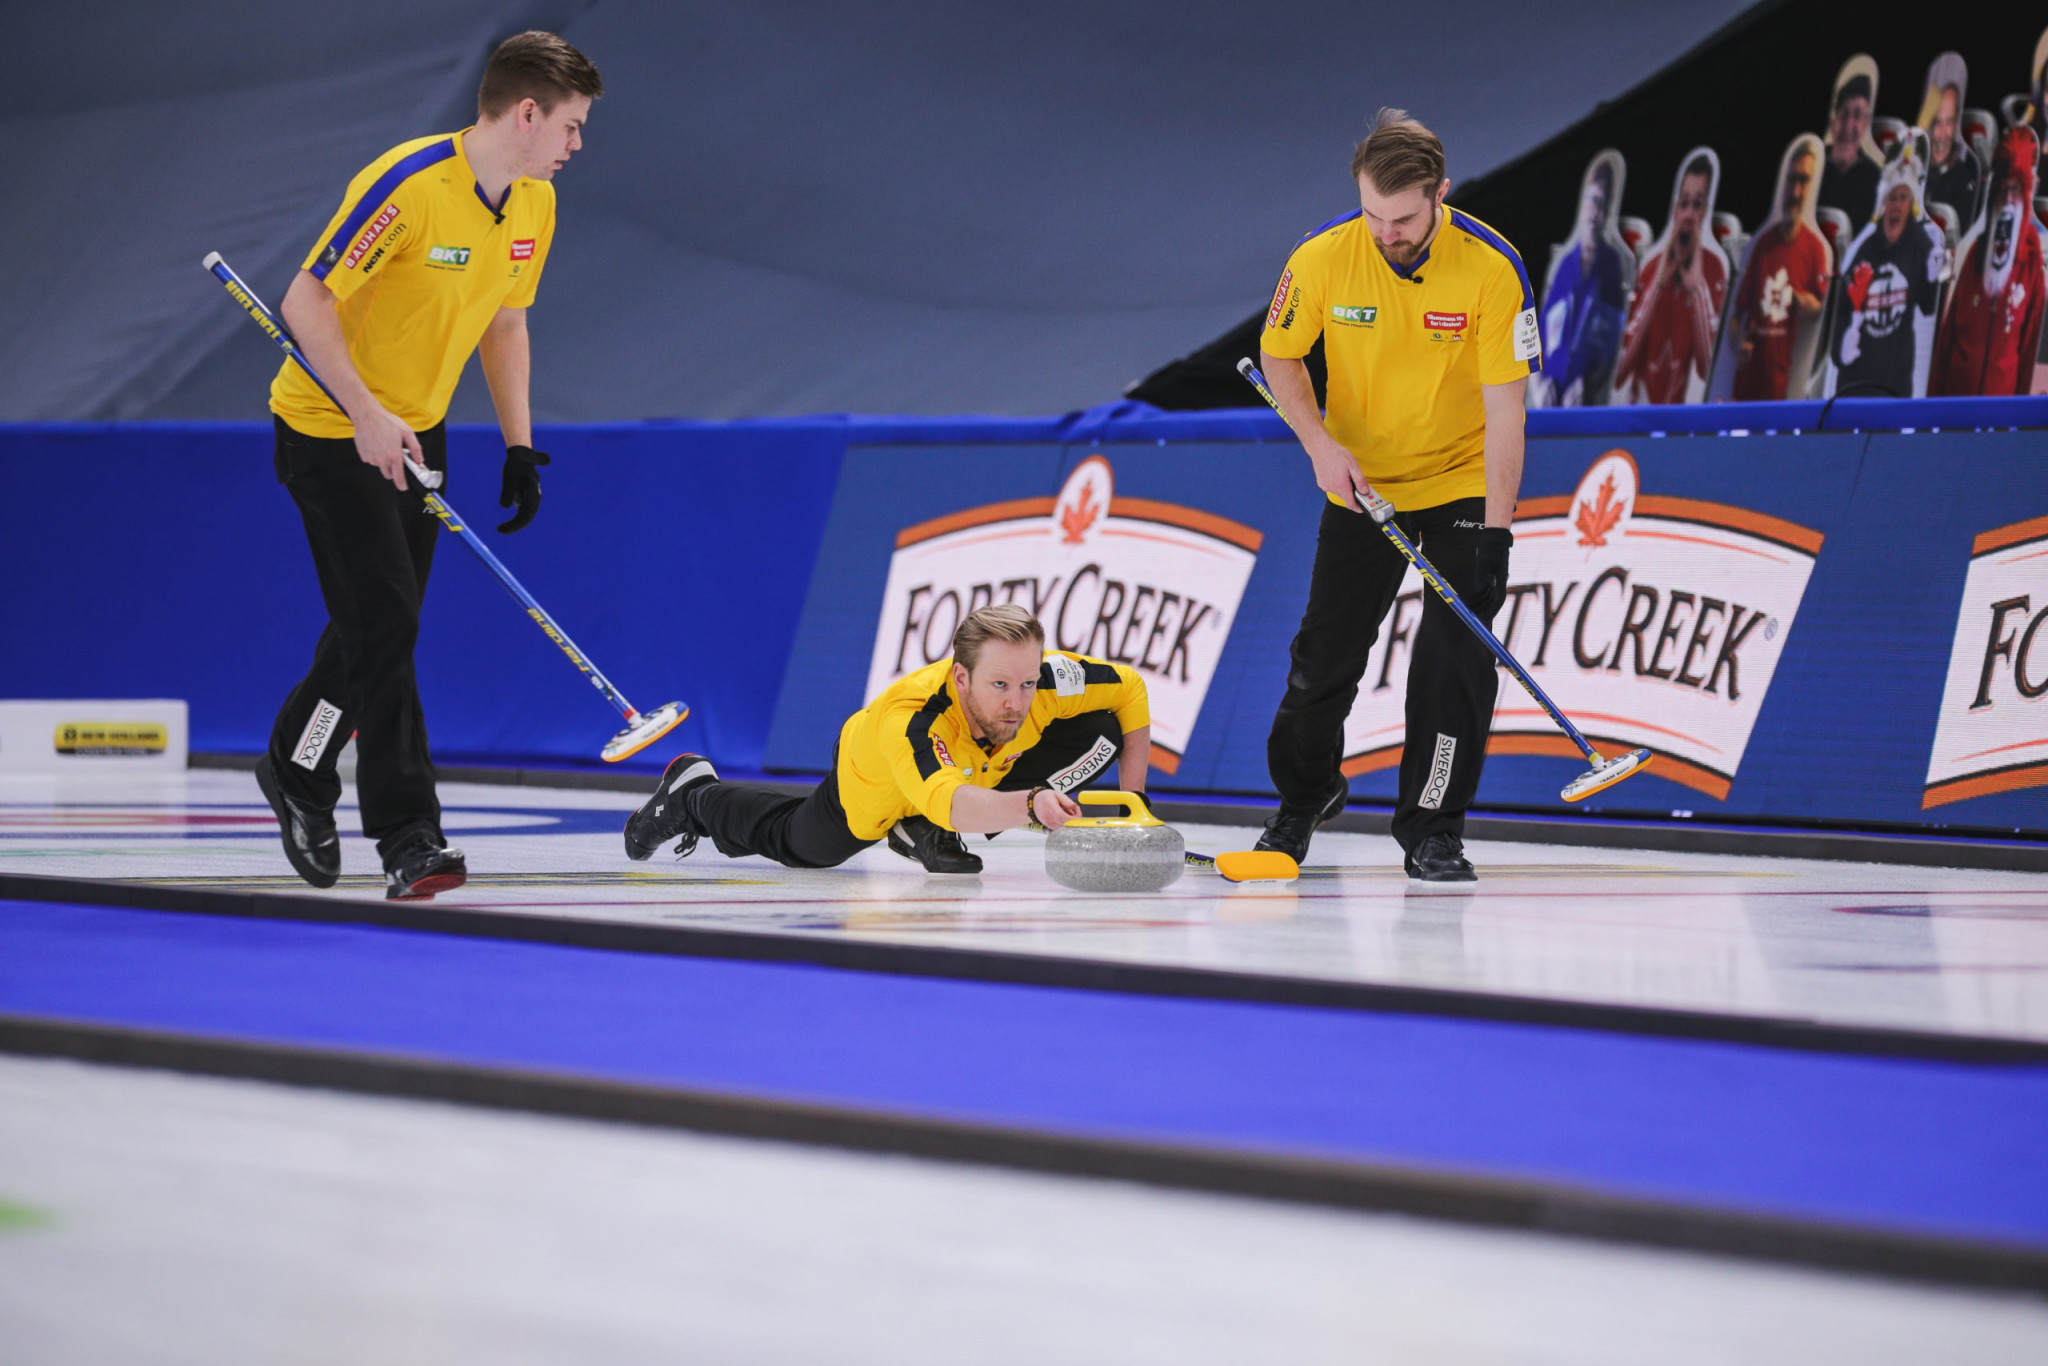 Niklas Edin's Sweden are looking to win their third world title in a row ©WCF/Jeffrey Au